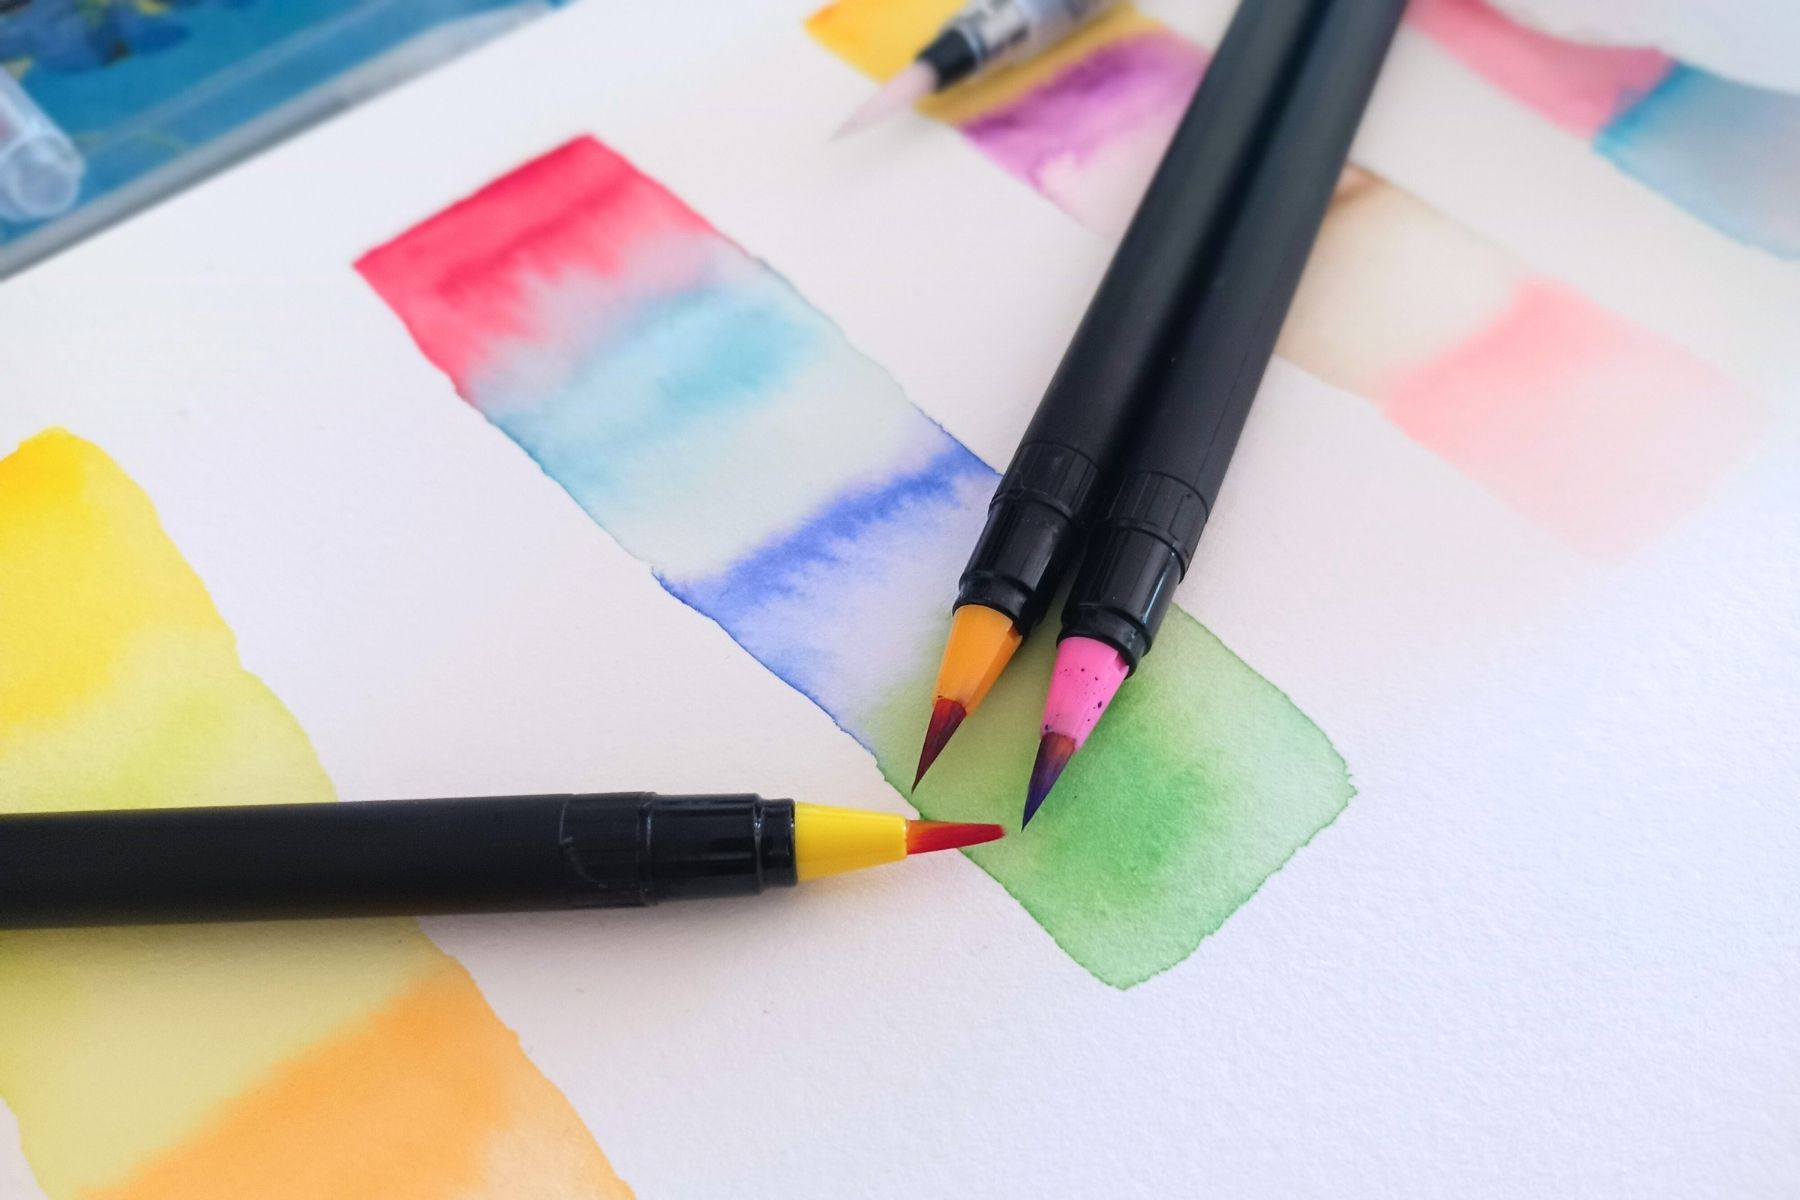 How to clean a watercolor brush pen in a jiffy: Two quick tricks